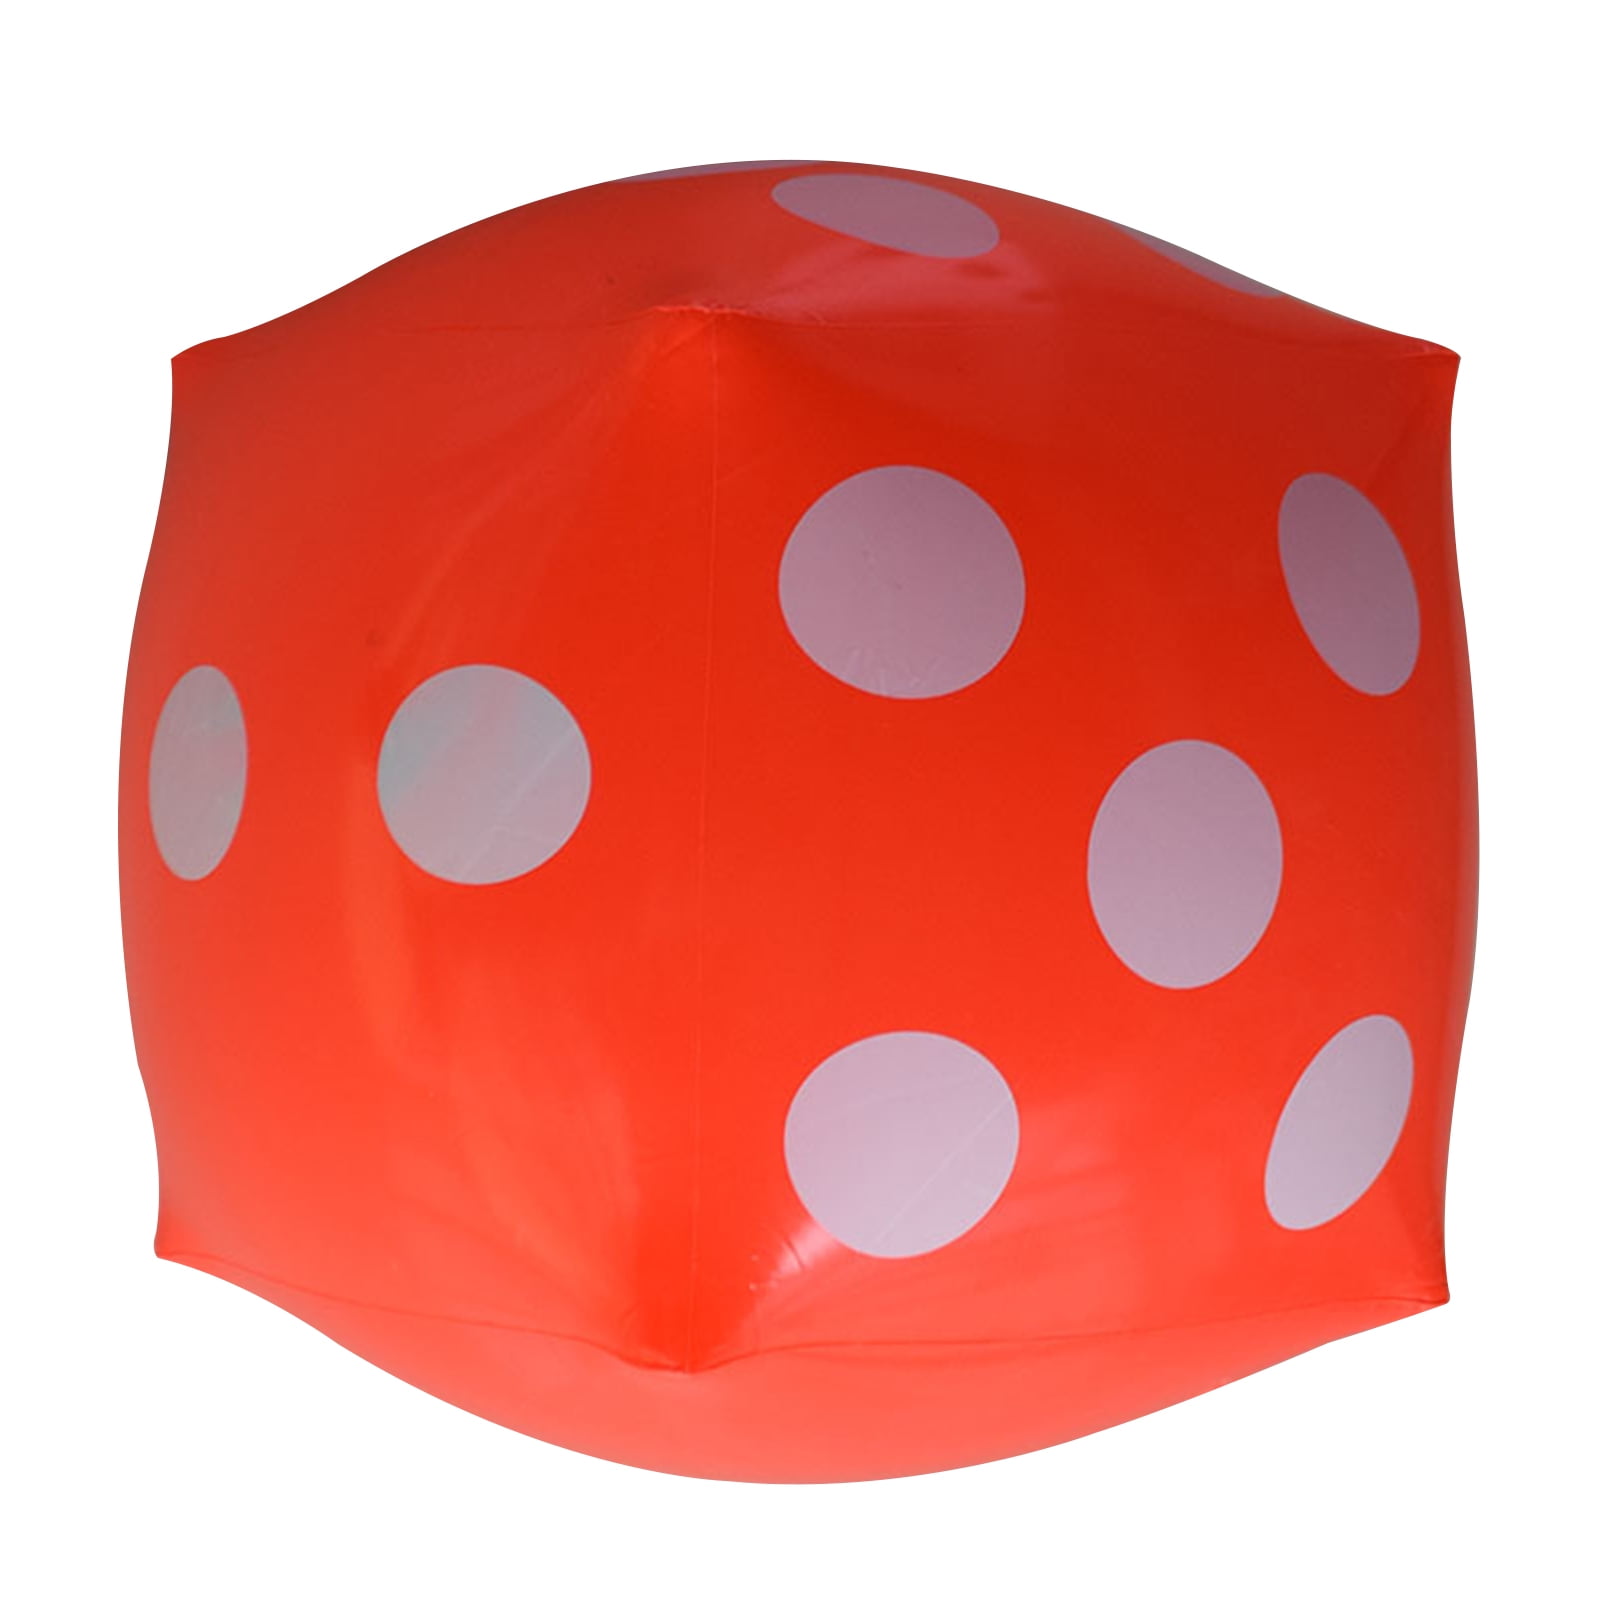 Details about   Large Inflatable Blow Up Dot Dice Kids Party Favours Outdoor Pool Toys Funny 